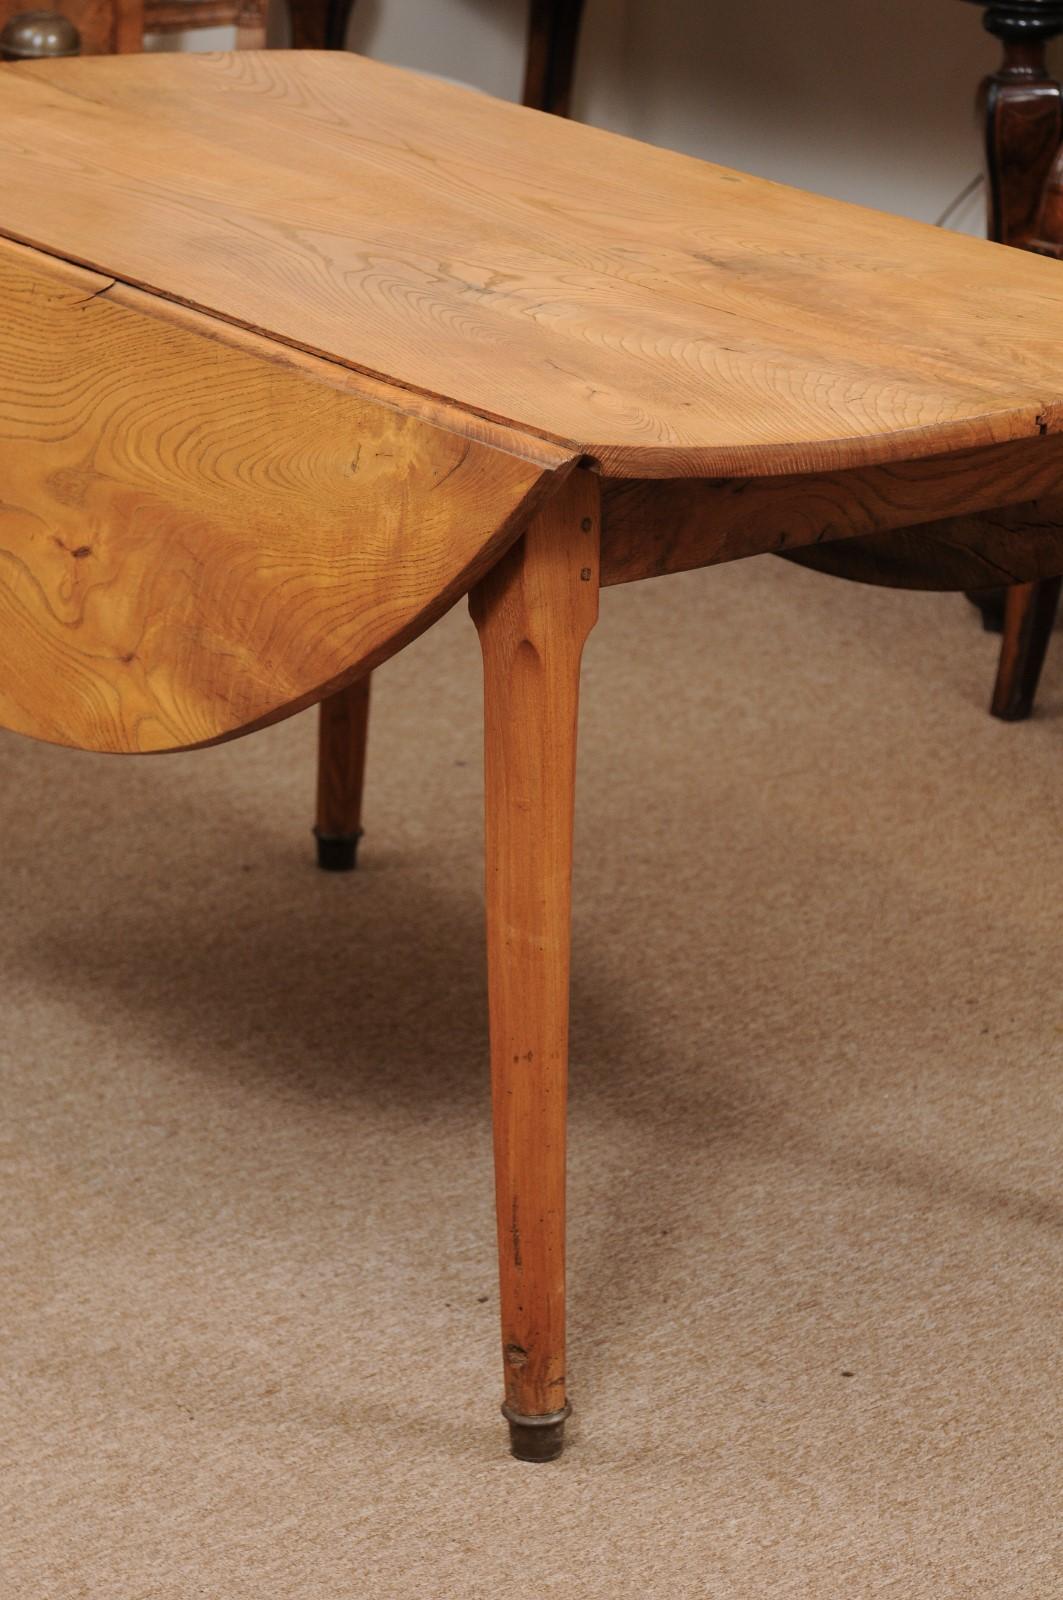 Early 19th Century French Directoire Ashwood Oval Drop-Leaf Table, circa 1800